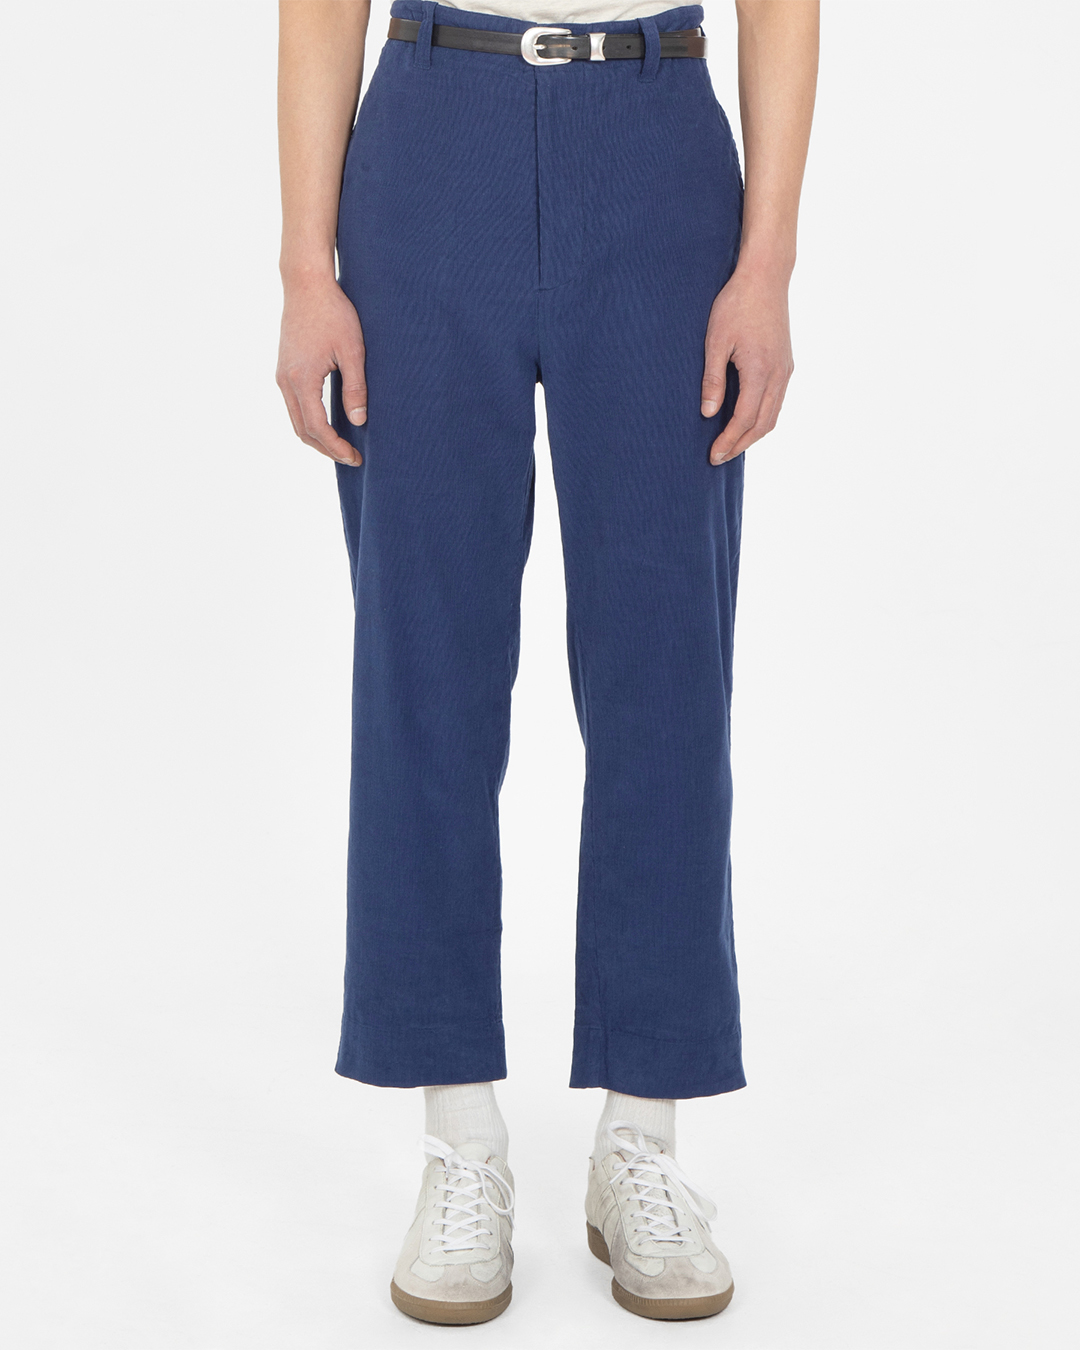 SUMMER CORDUROY FRENCH WORK PANTS (NAVY)